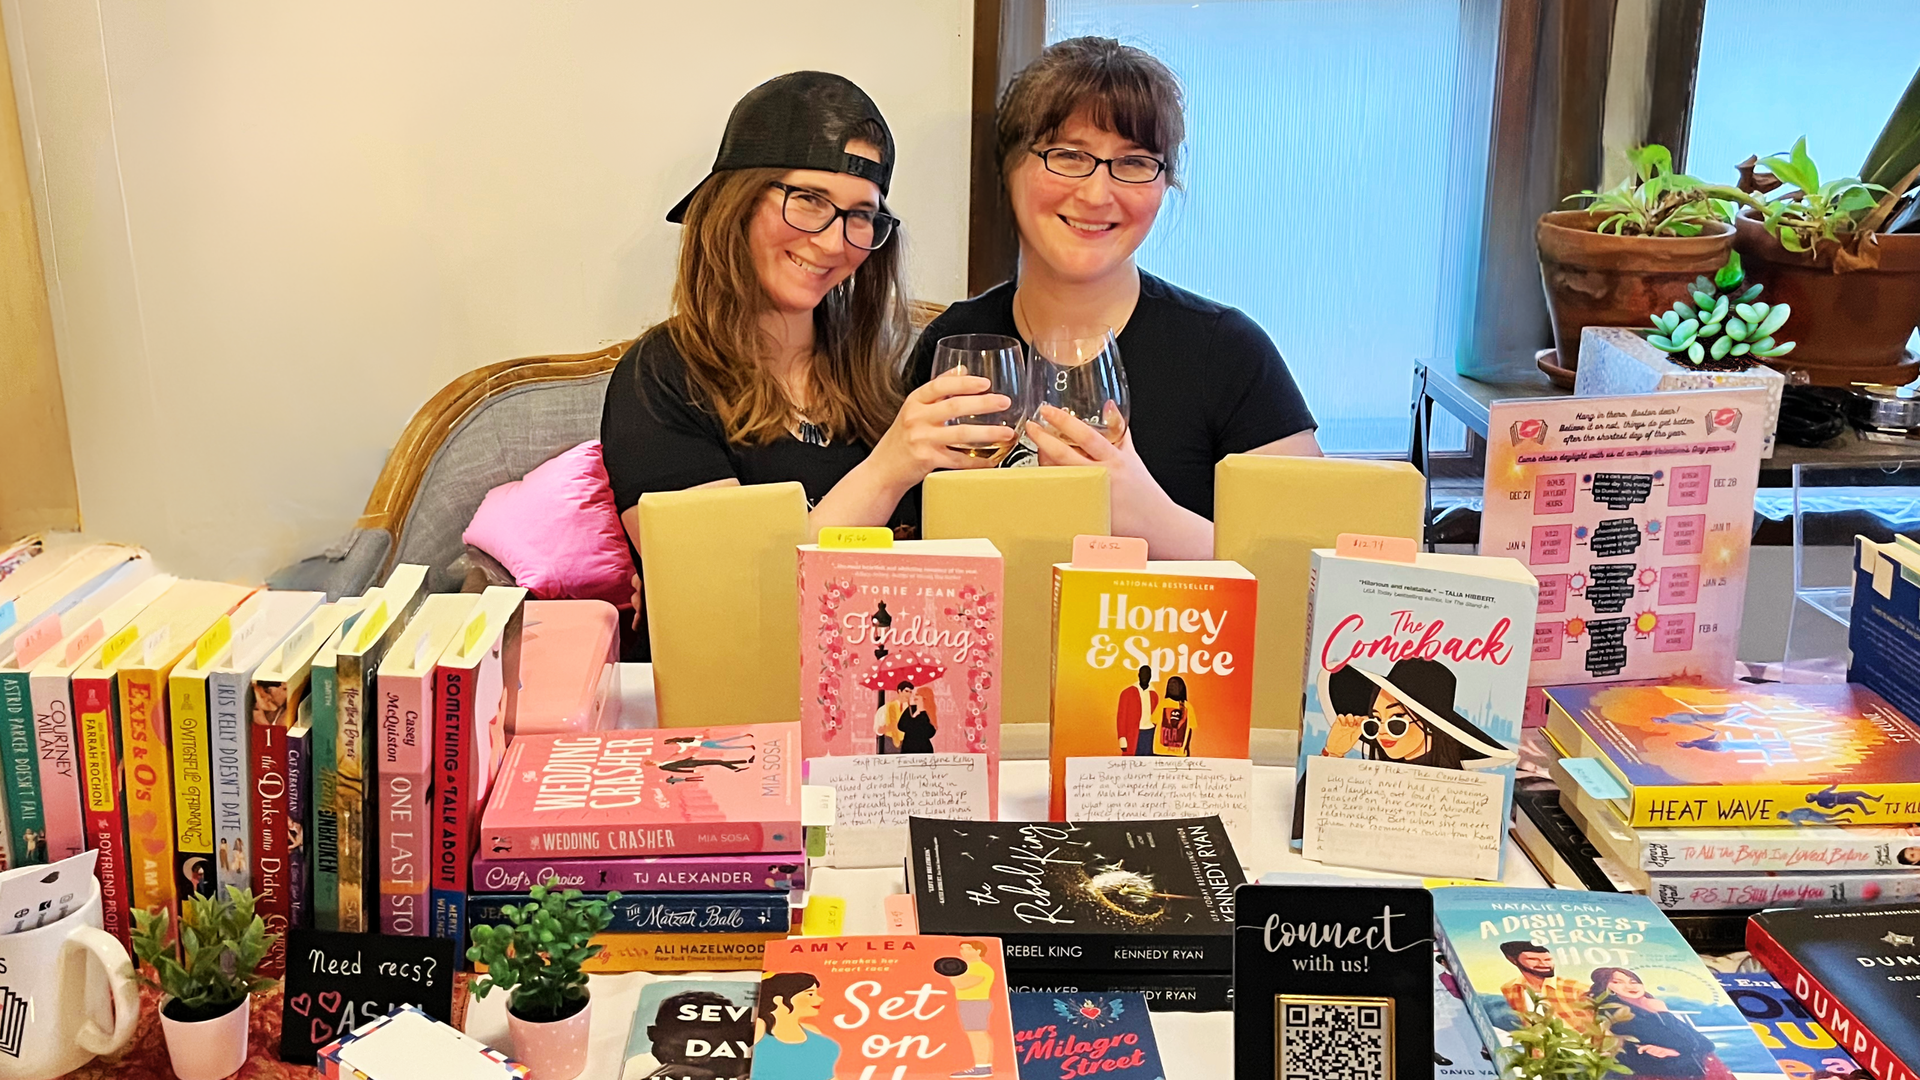 Twins Hannah, left, and Lily, right, Barrett raise winge glasses as they sit in front of a table filled with various romance books. They're starting a romance-themed book pop-up.